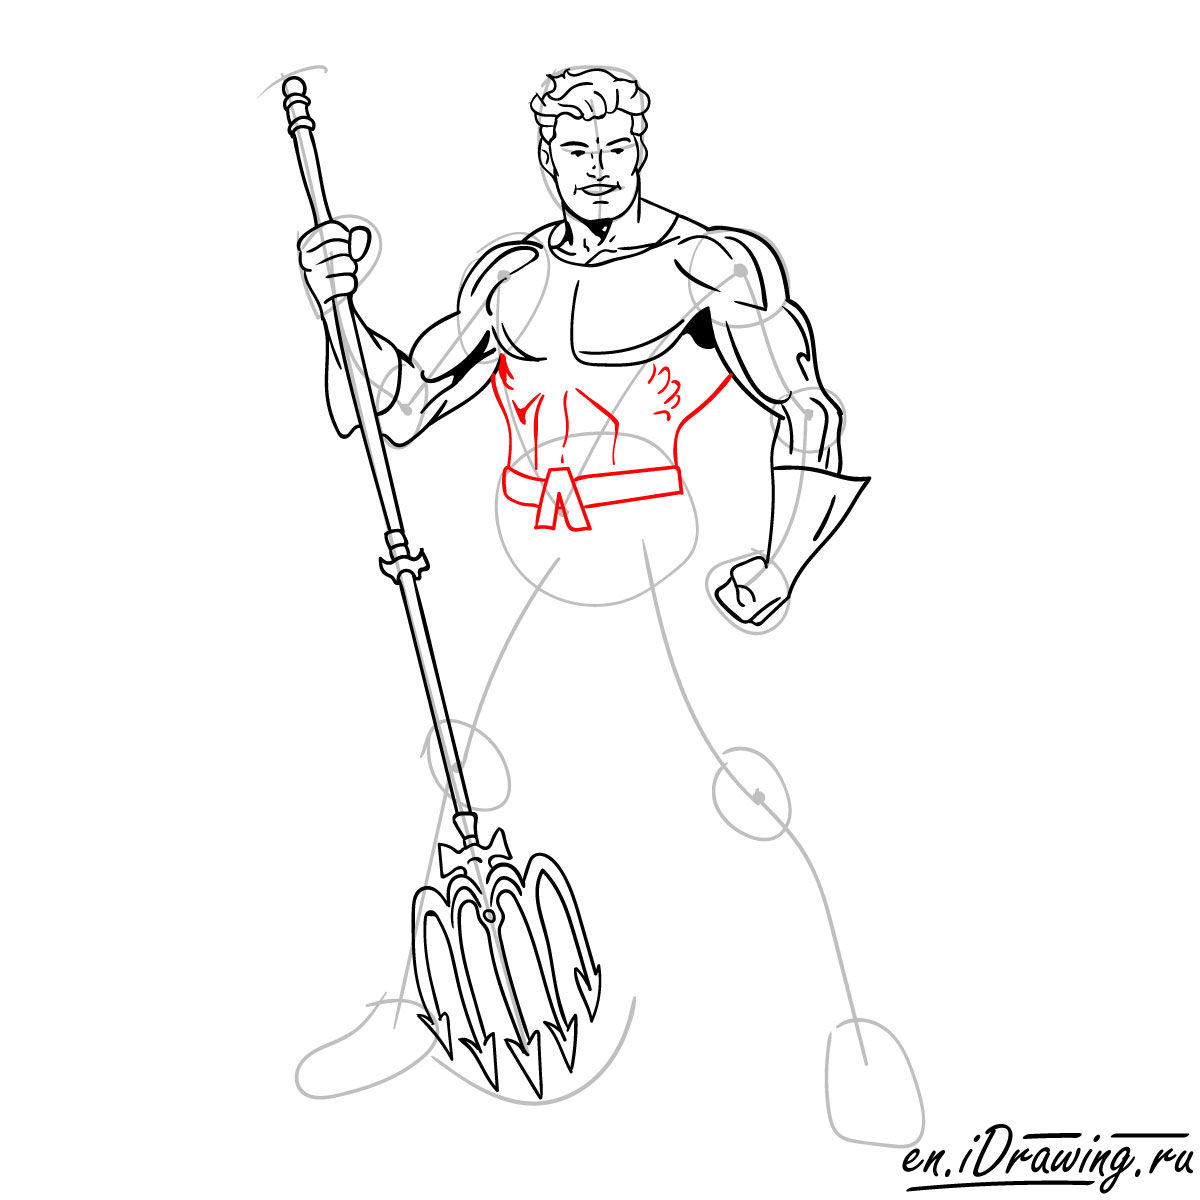 How to draw Aquaman from cartoons and comic books - step 12